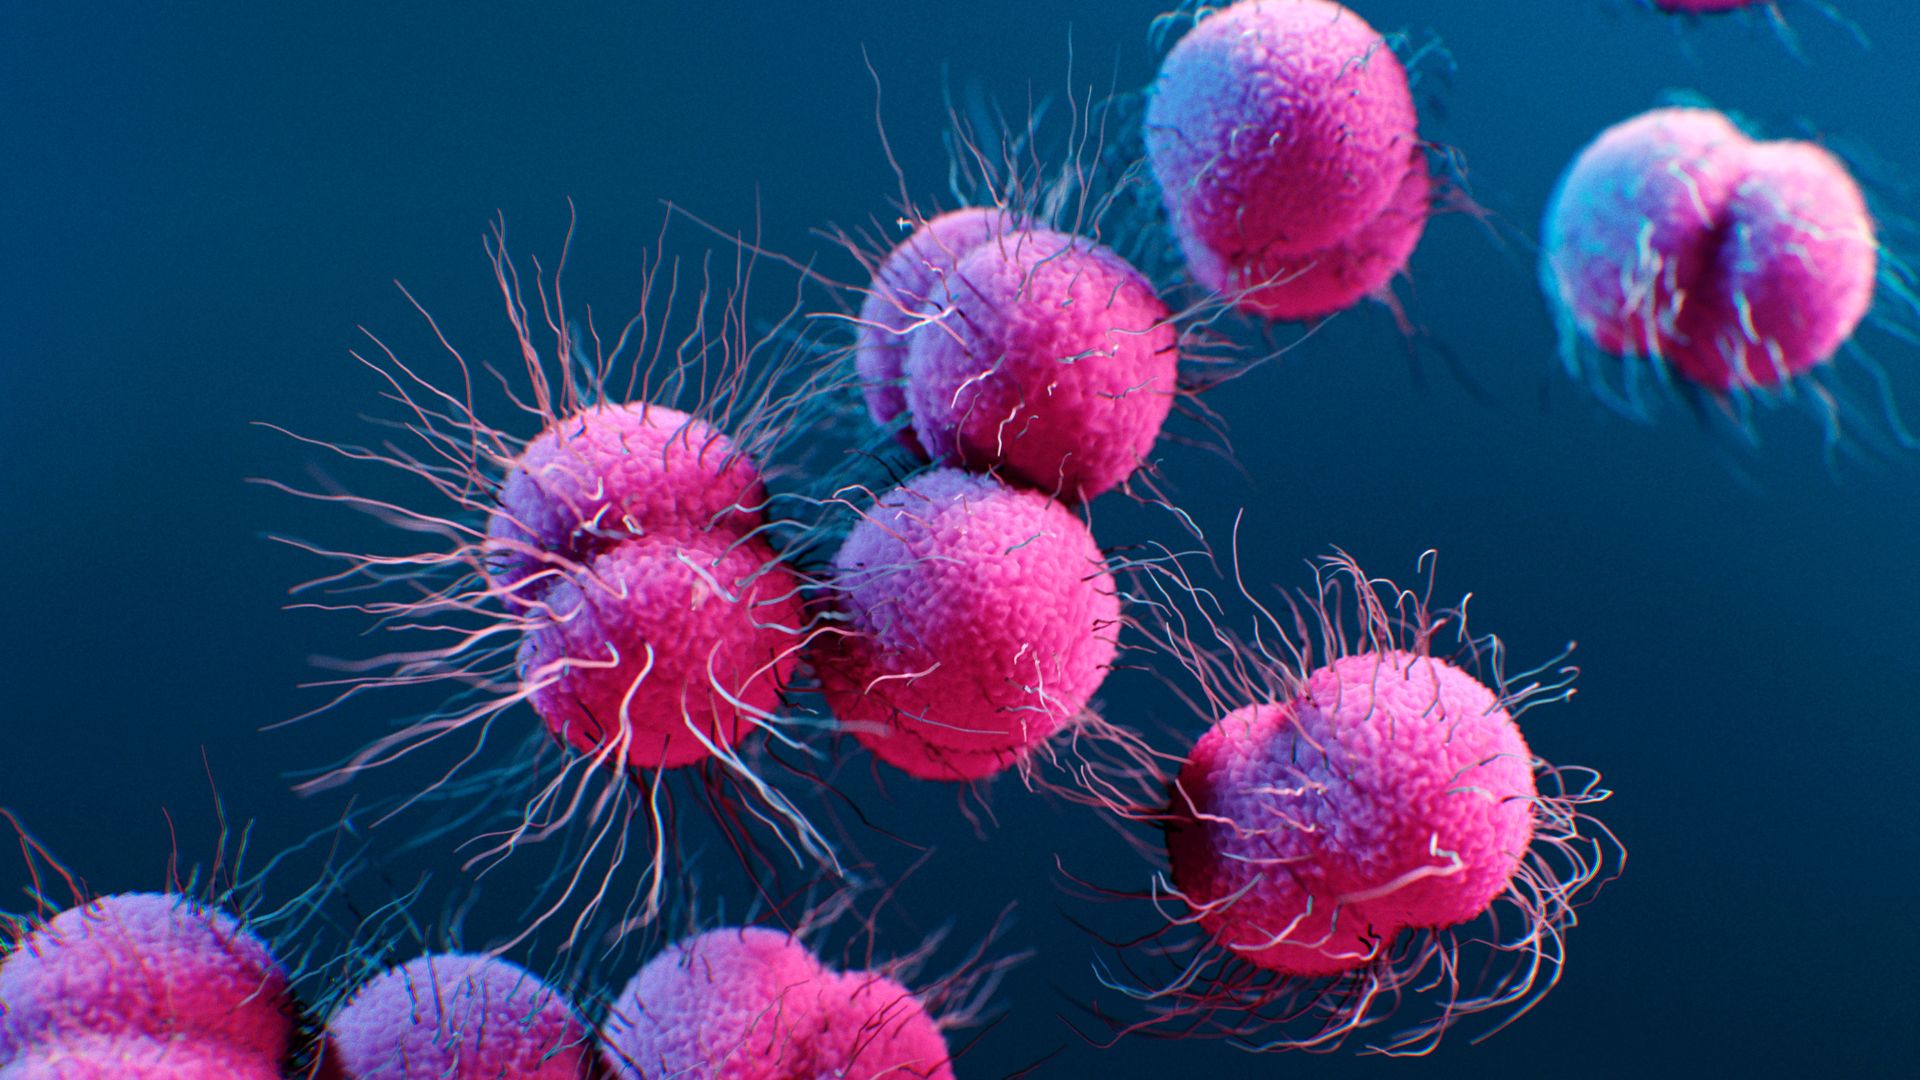 New ‘concerning’ strain of drug-resistant gonorrhea found in U.S. for 1st time